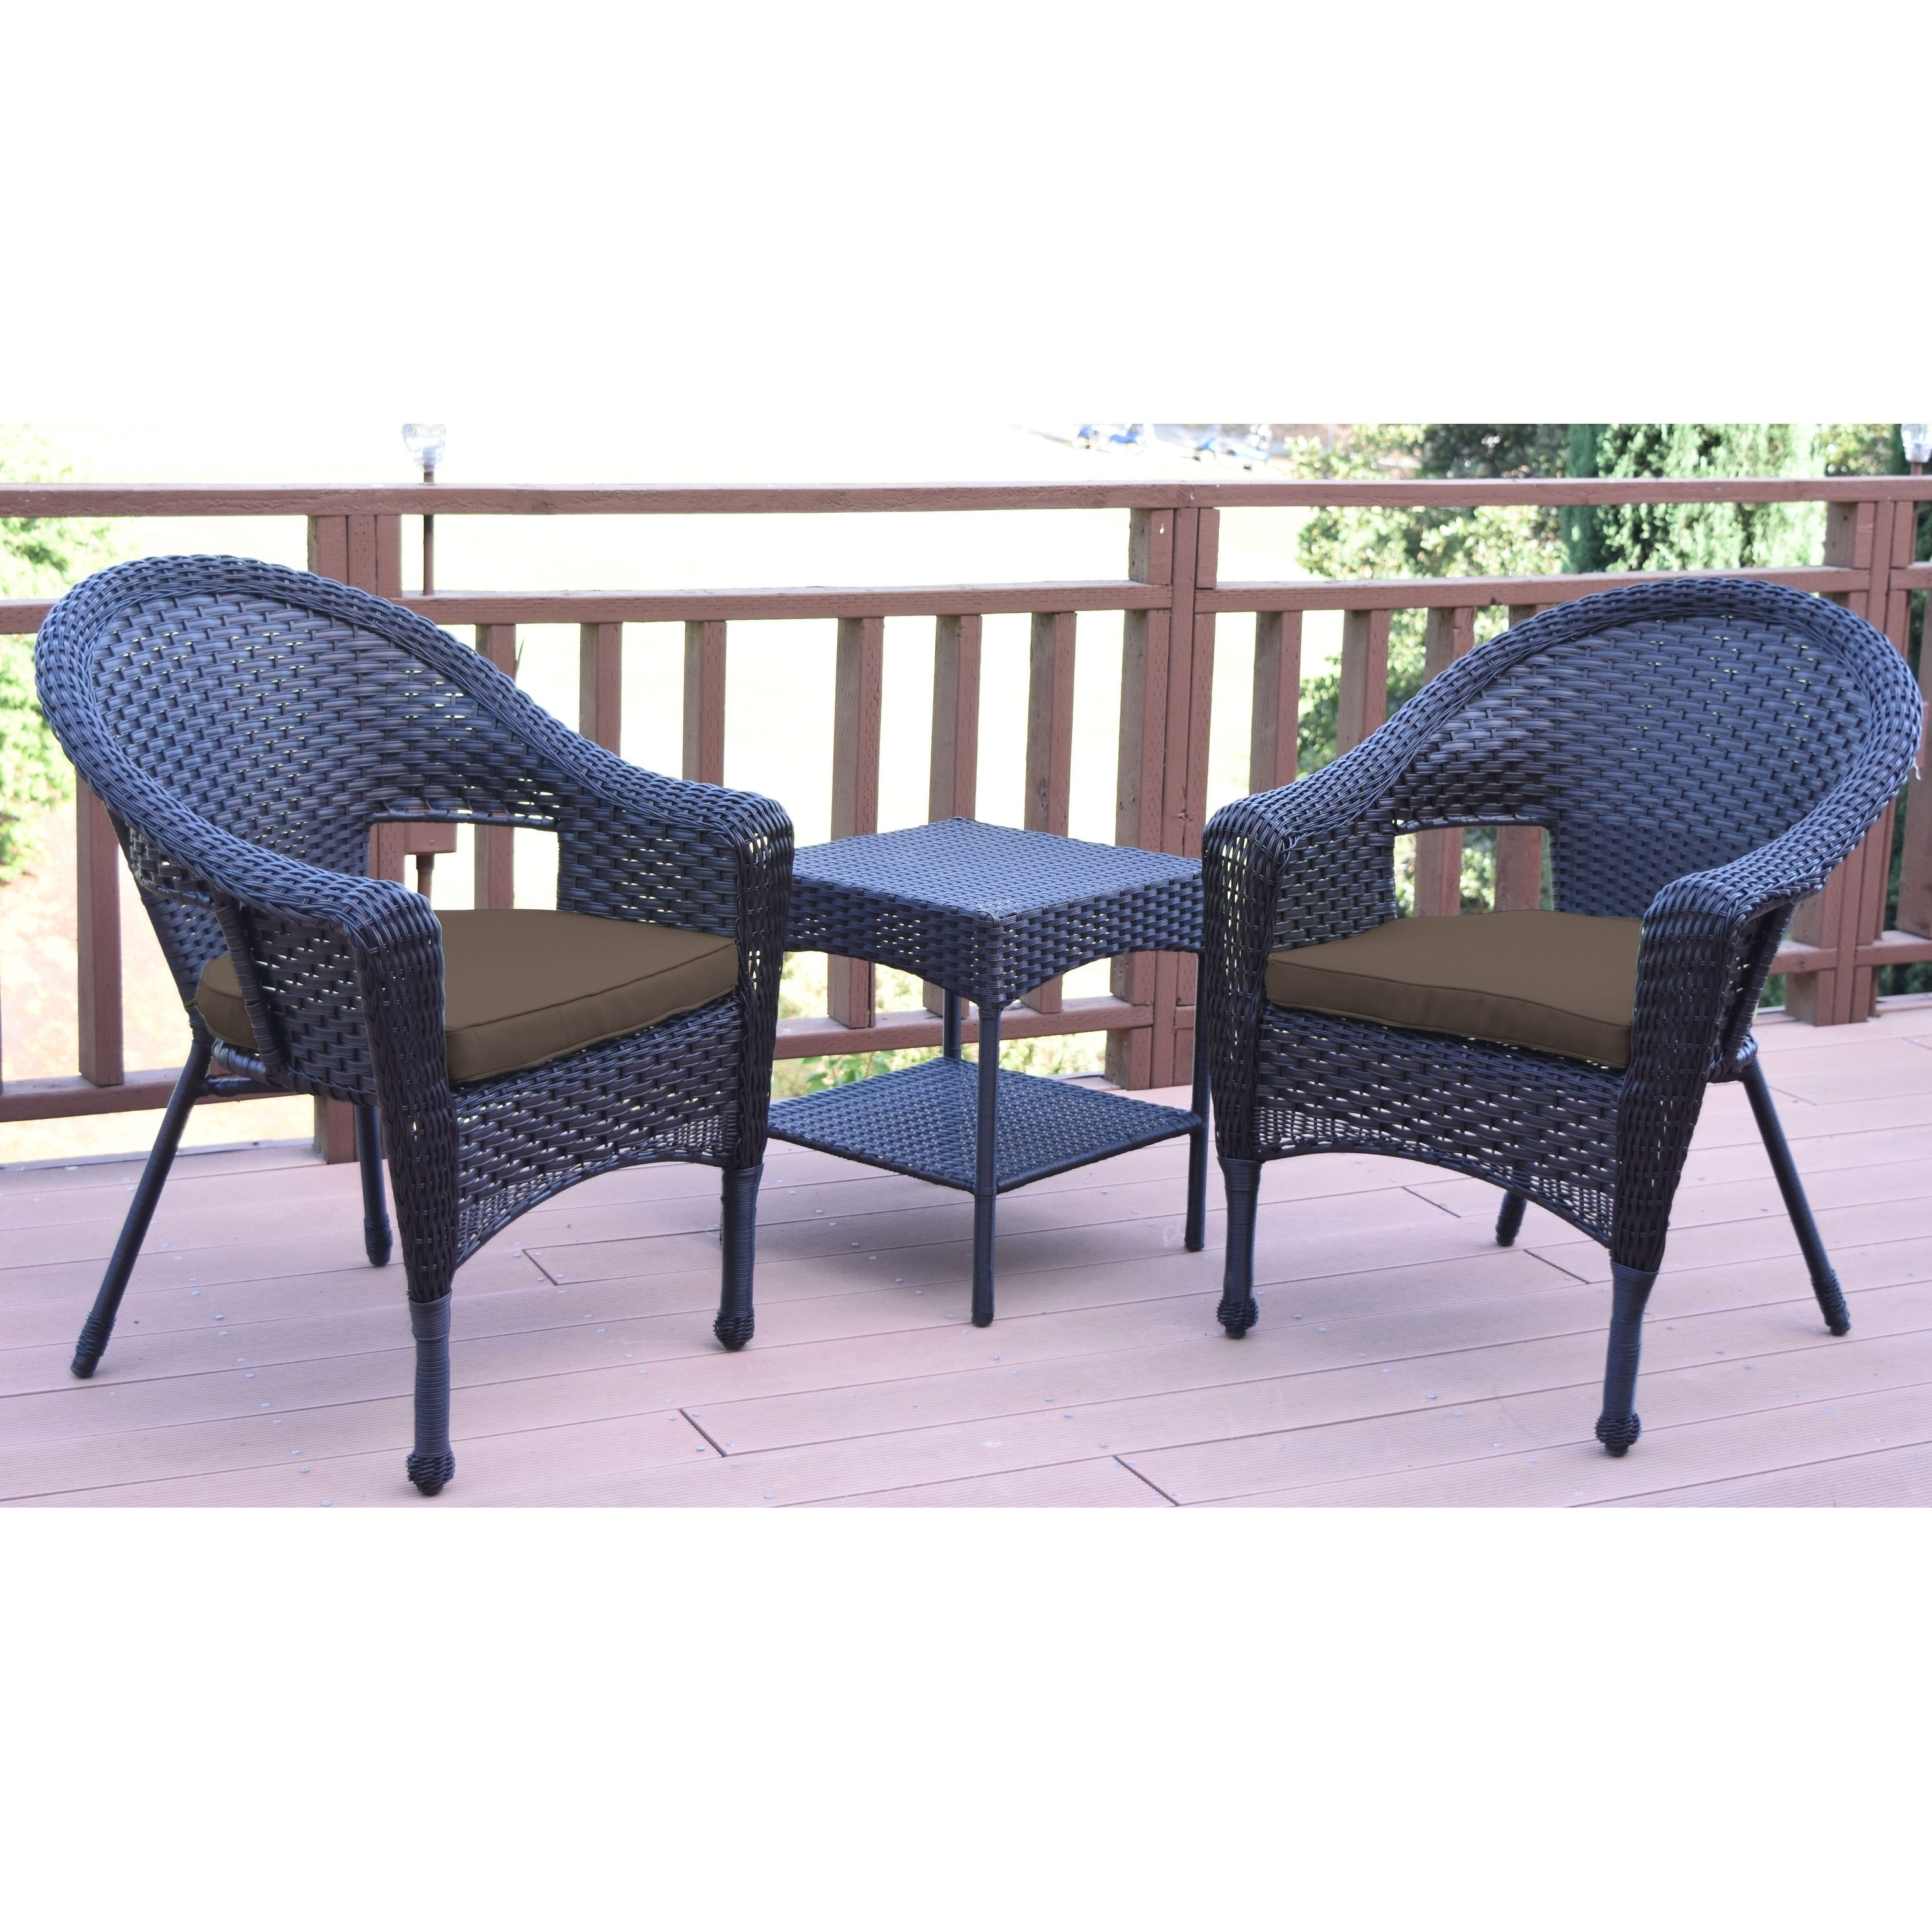 Set Of 3 Espresso Resin Wicker Clark Single Chair With 2 Inch Brown Cushion And End Table